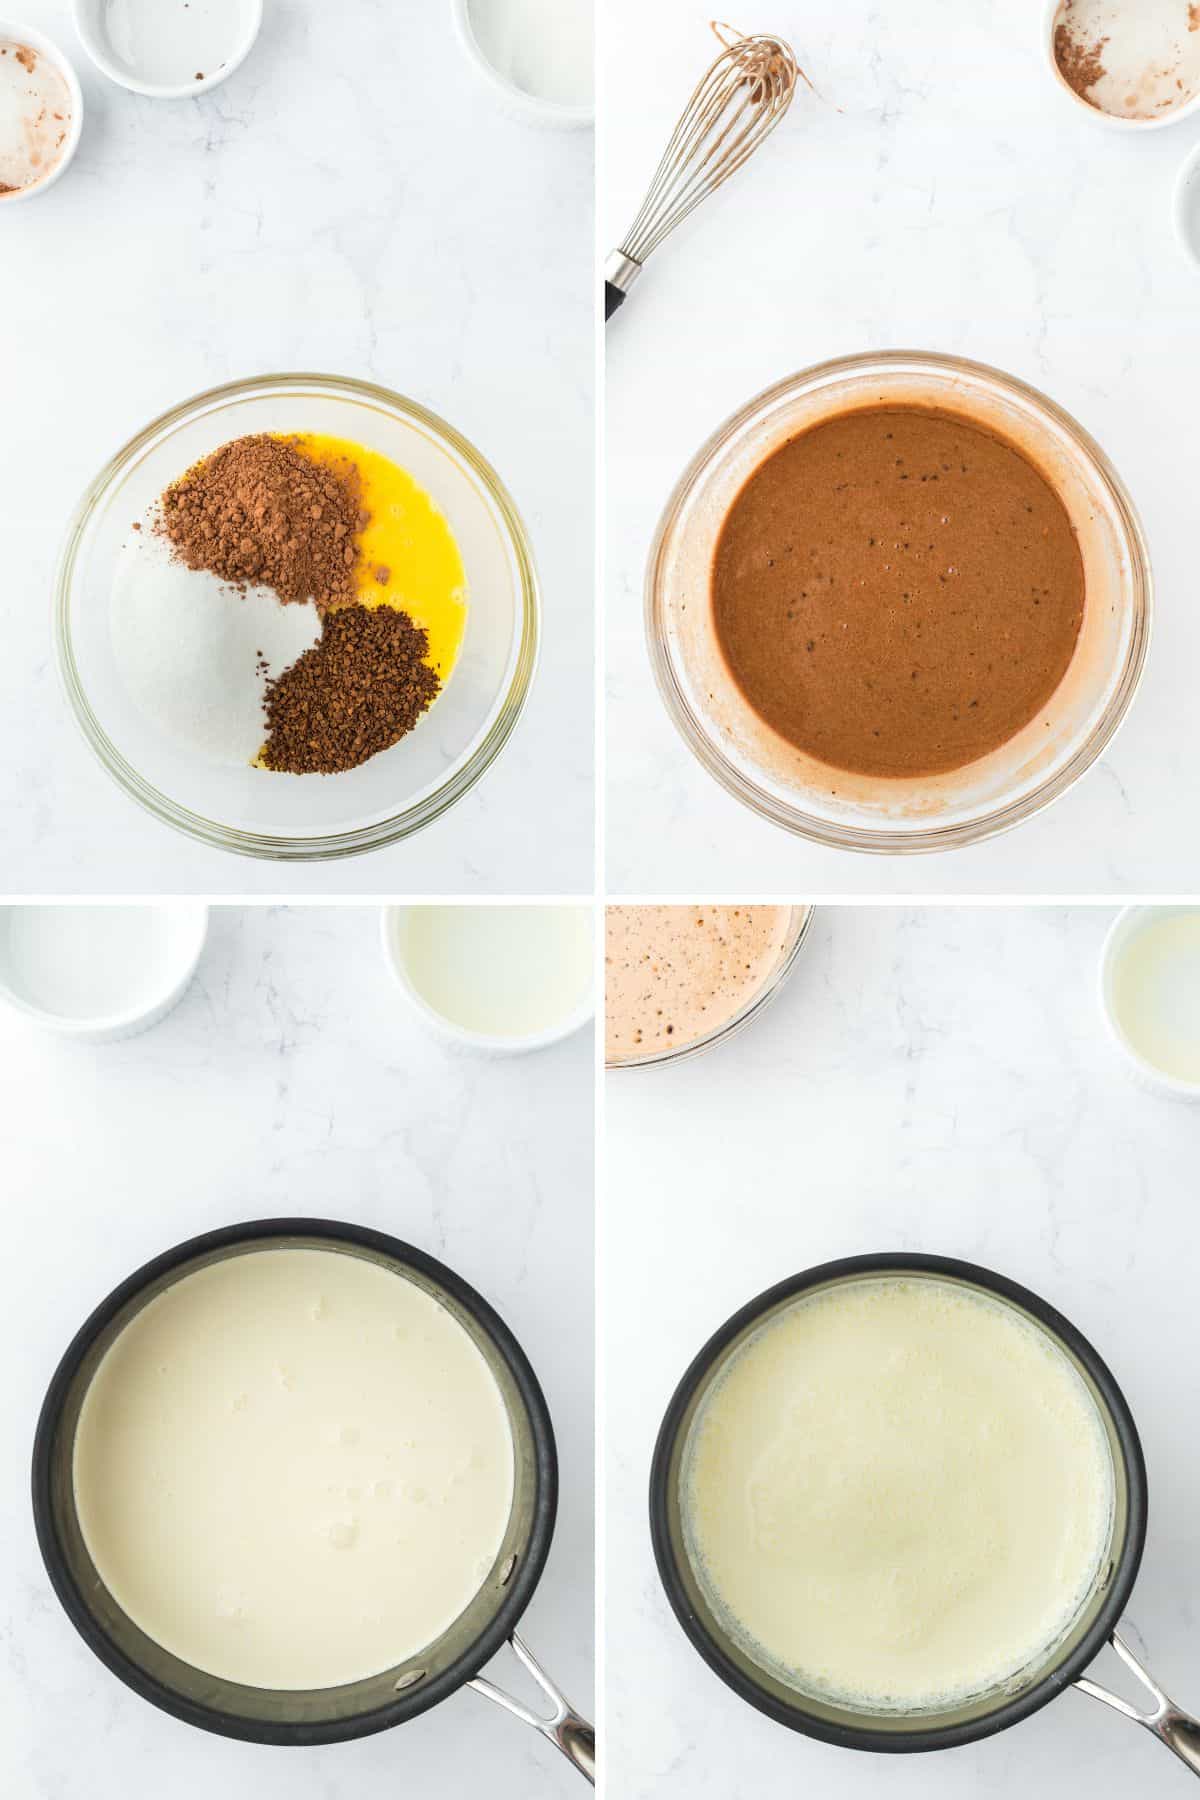 A collage showing the mixing of the chocolate and egg mixture for the ice cream and heating the dairy.